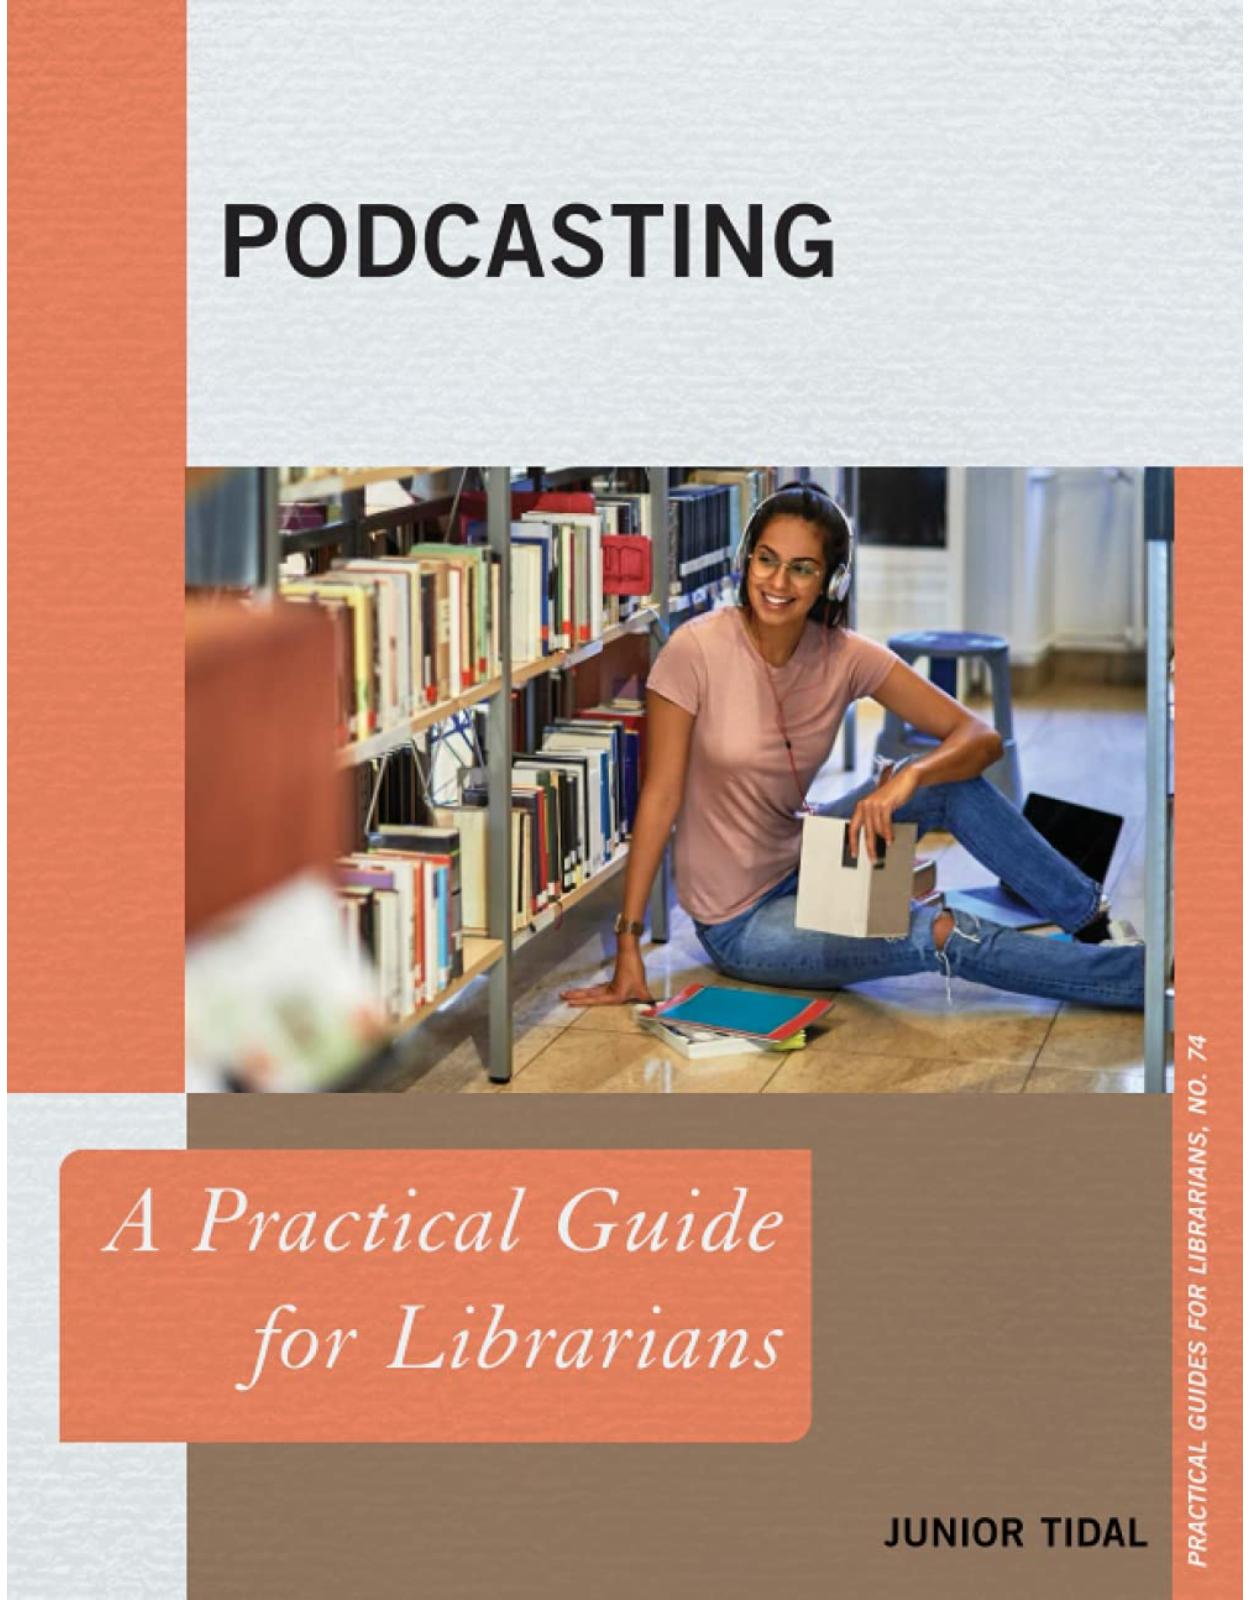 Podcasting: A Practical Guide for Librarians: 74 (Practical Guides for Librarians)